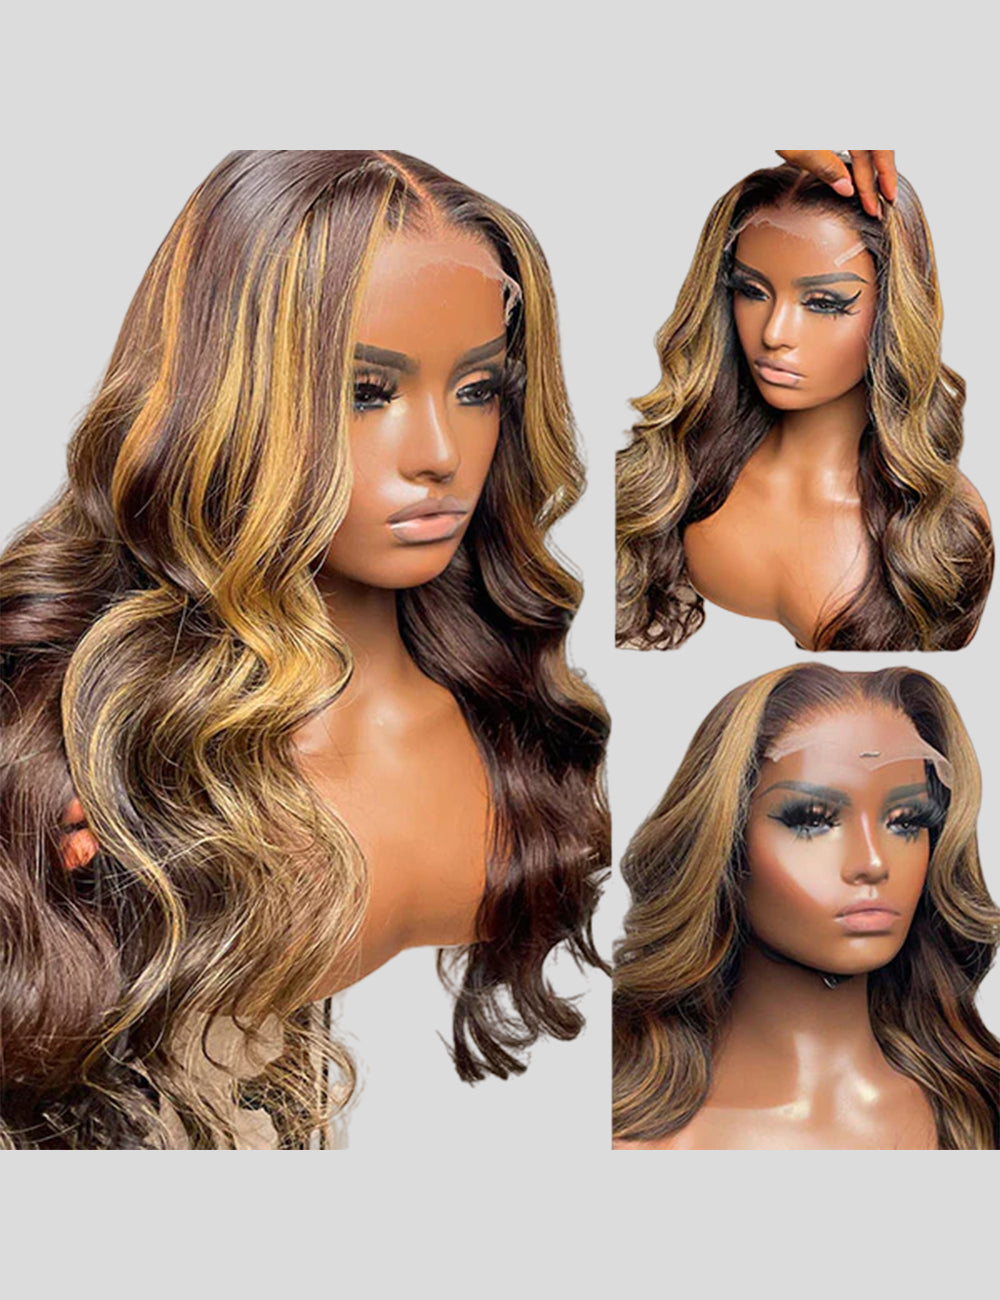 32 Inch Balayage Highlight Wigs Body Wave Colored Wigs 13x4 Frontal Lace Wigs